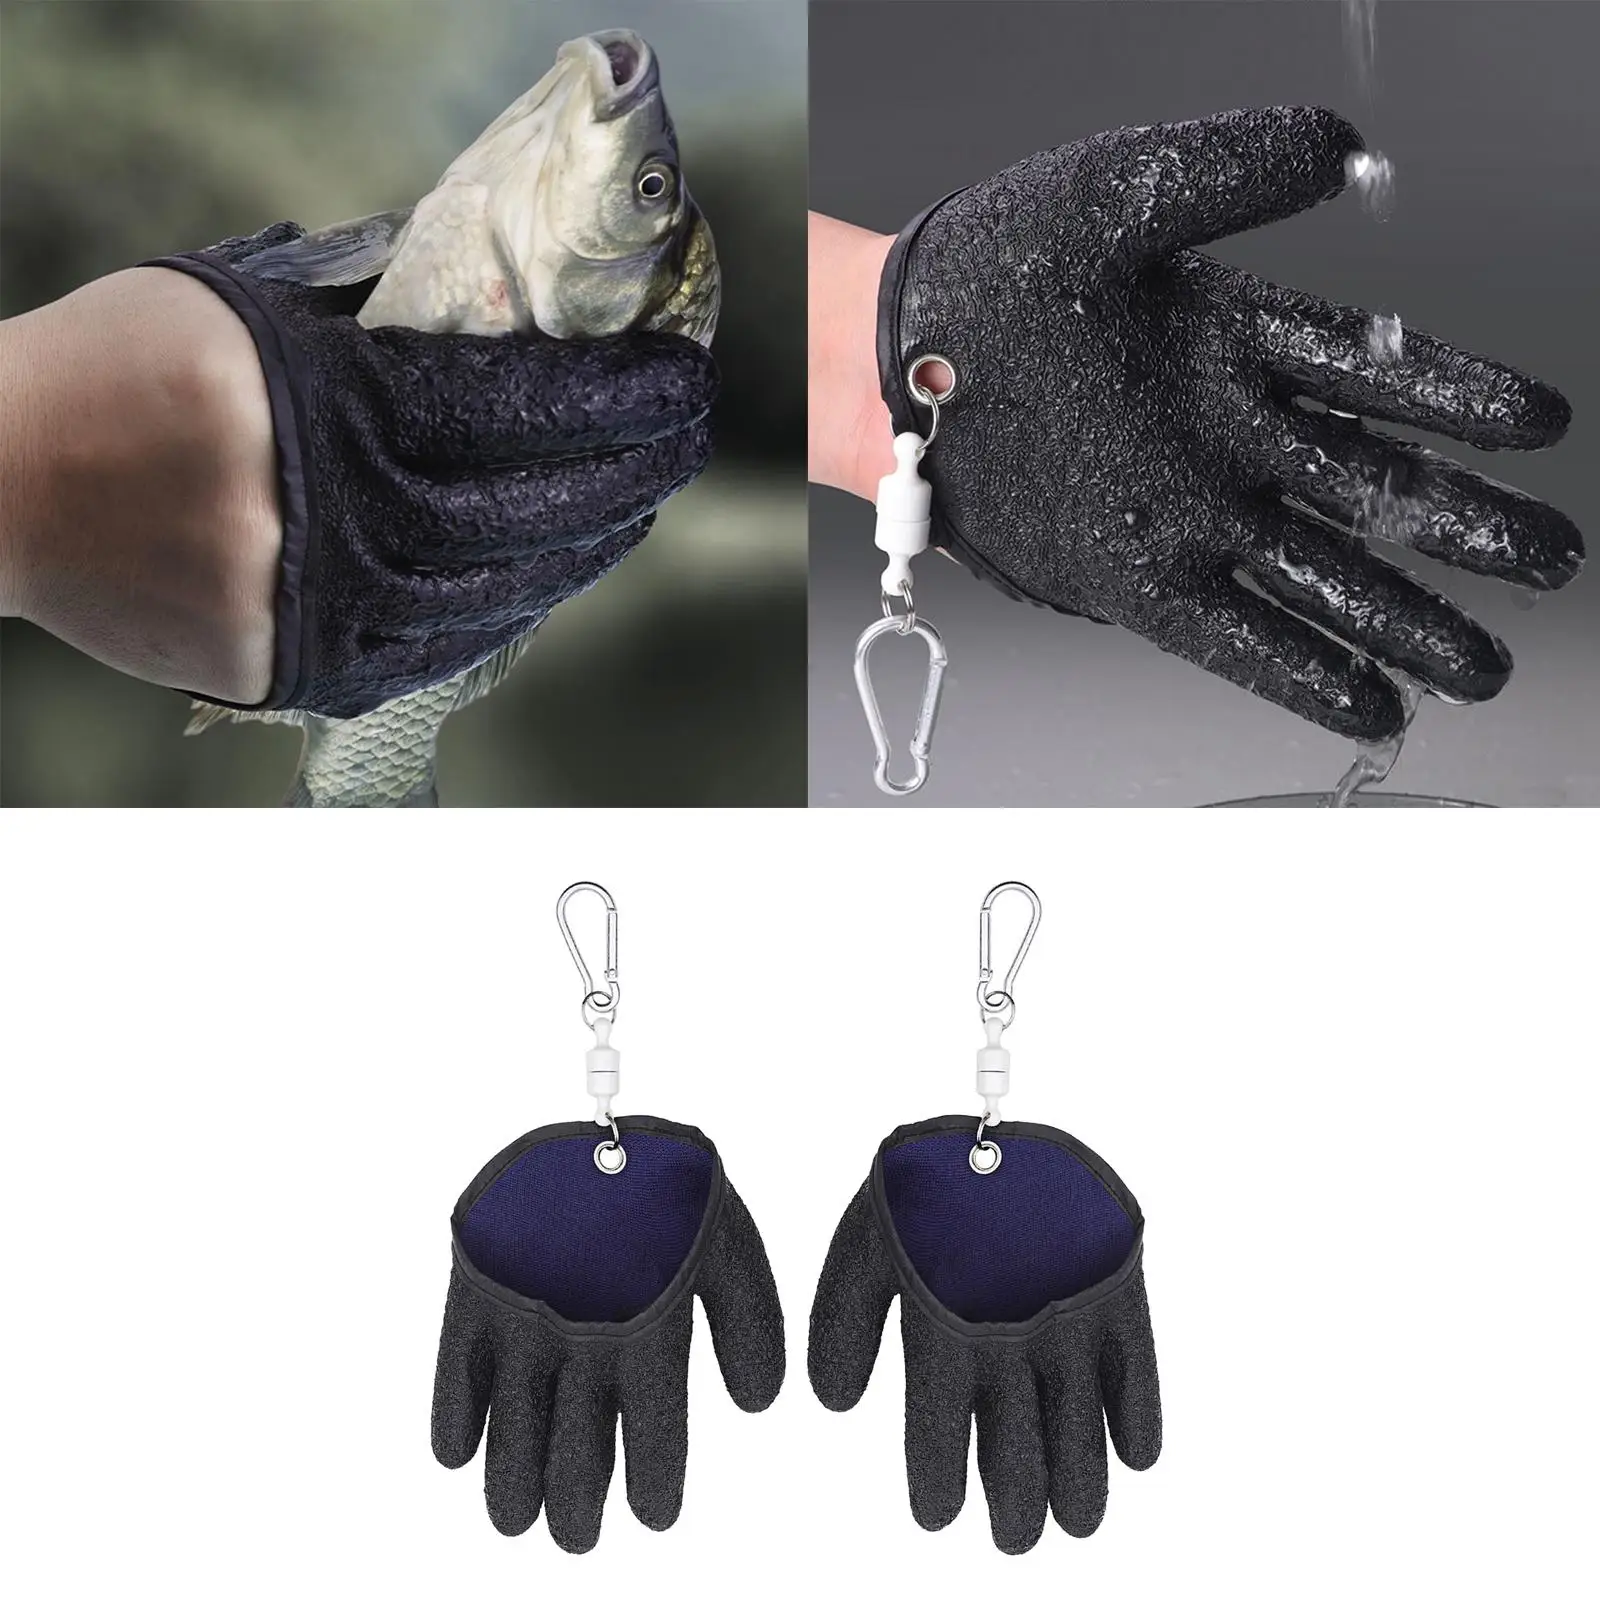 Fishing Glove with / Release, Professional Fisherman Fish Gloves